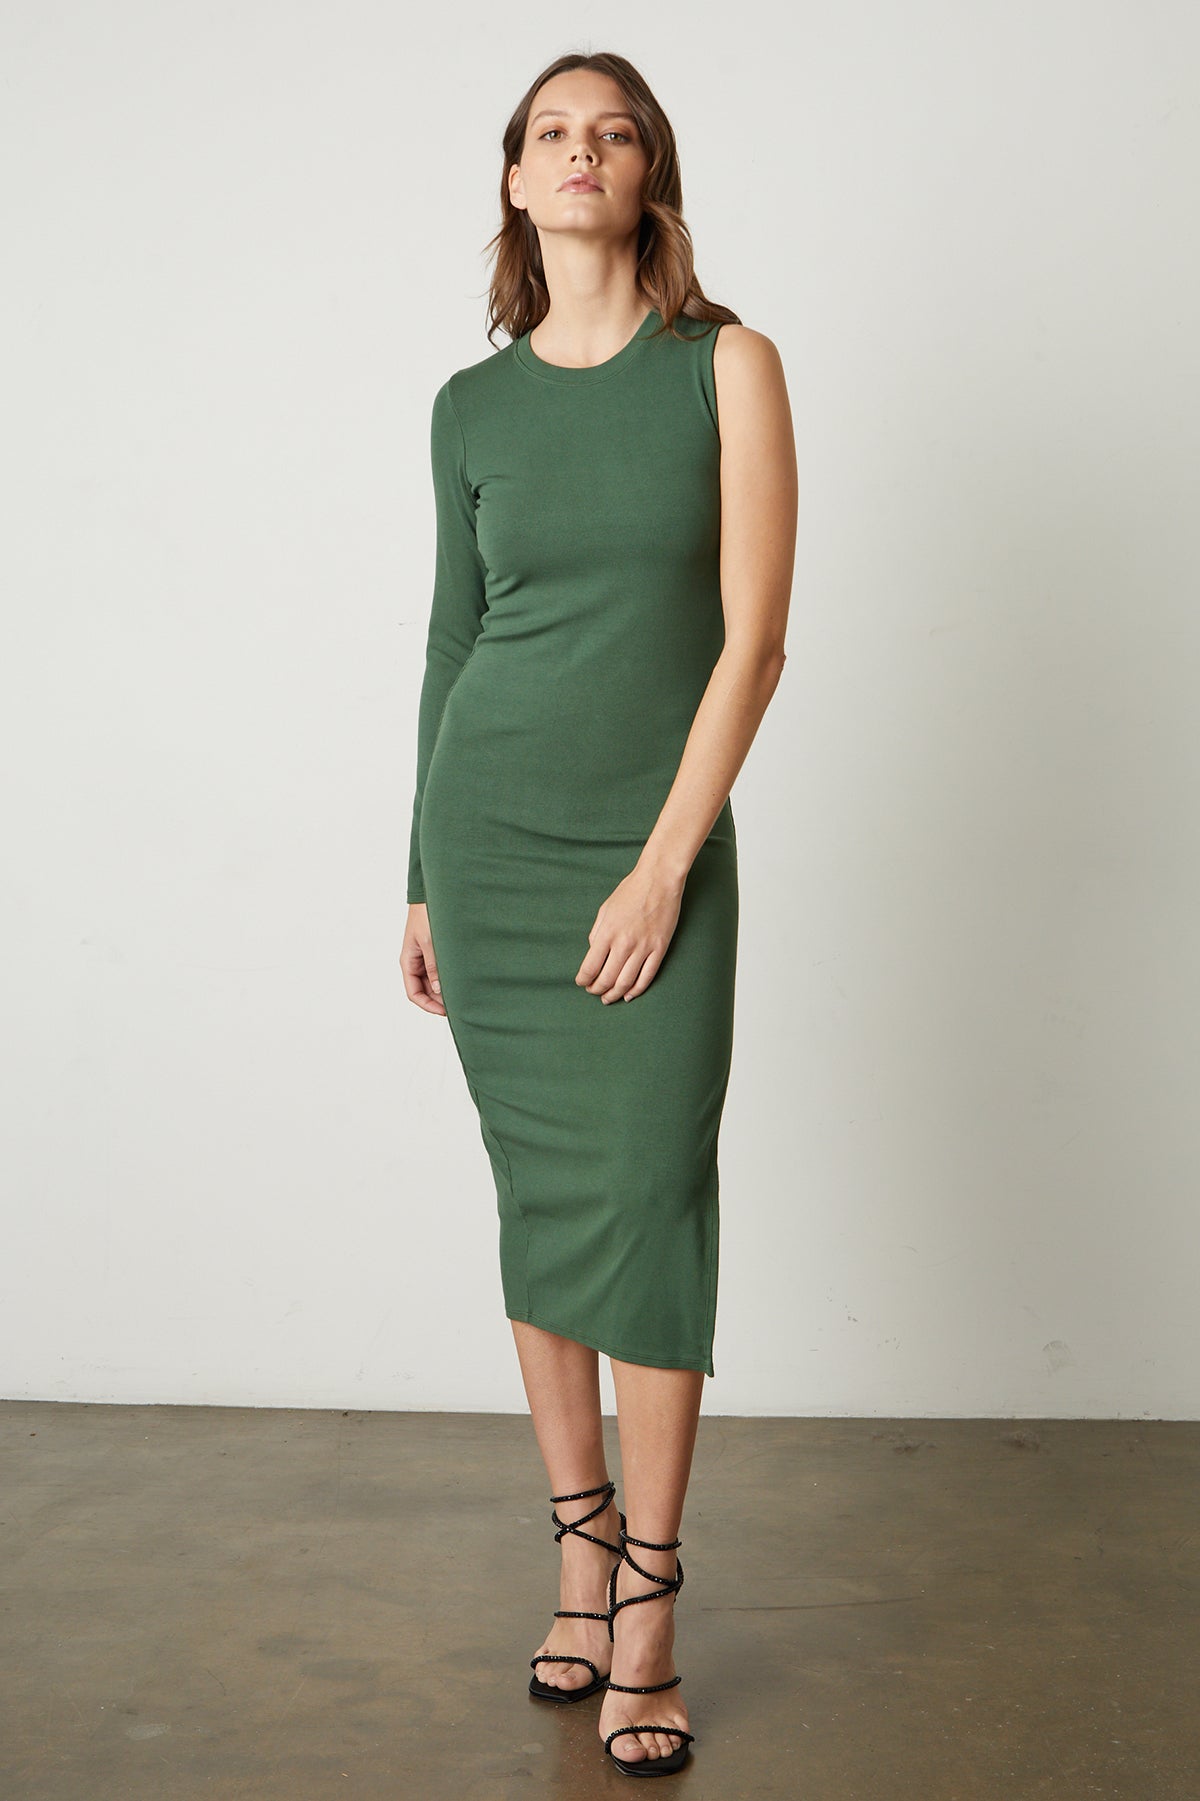   Trina Asymmetrical Midi Dress in willow green full length front with black sandal heels 